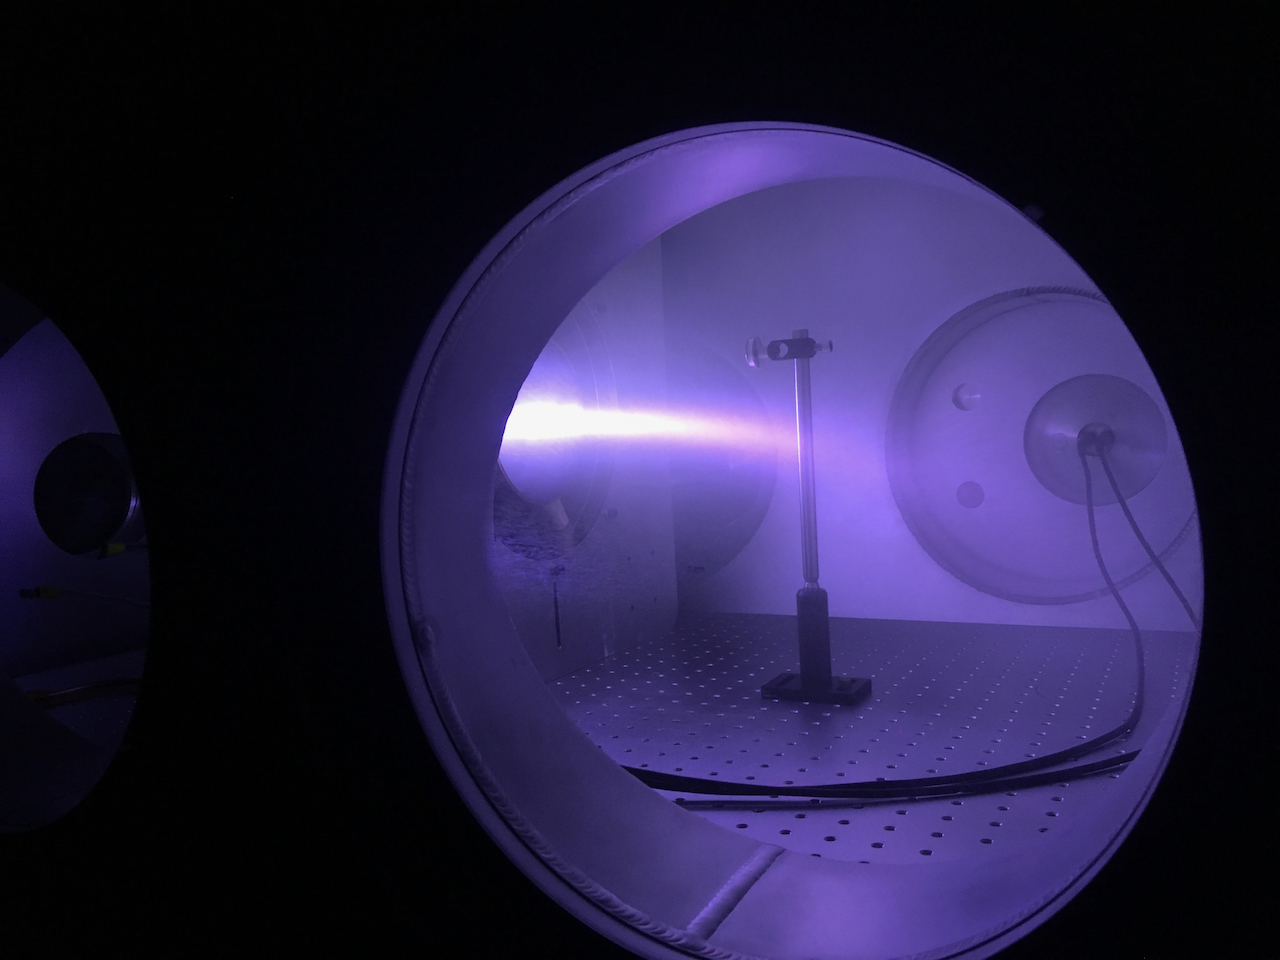 Looking at a laser through a cylinder viewpoint, purple in color, laser pointing from source to the left